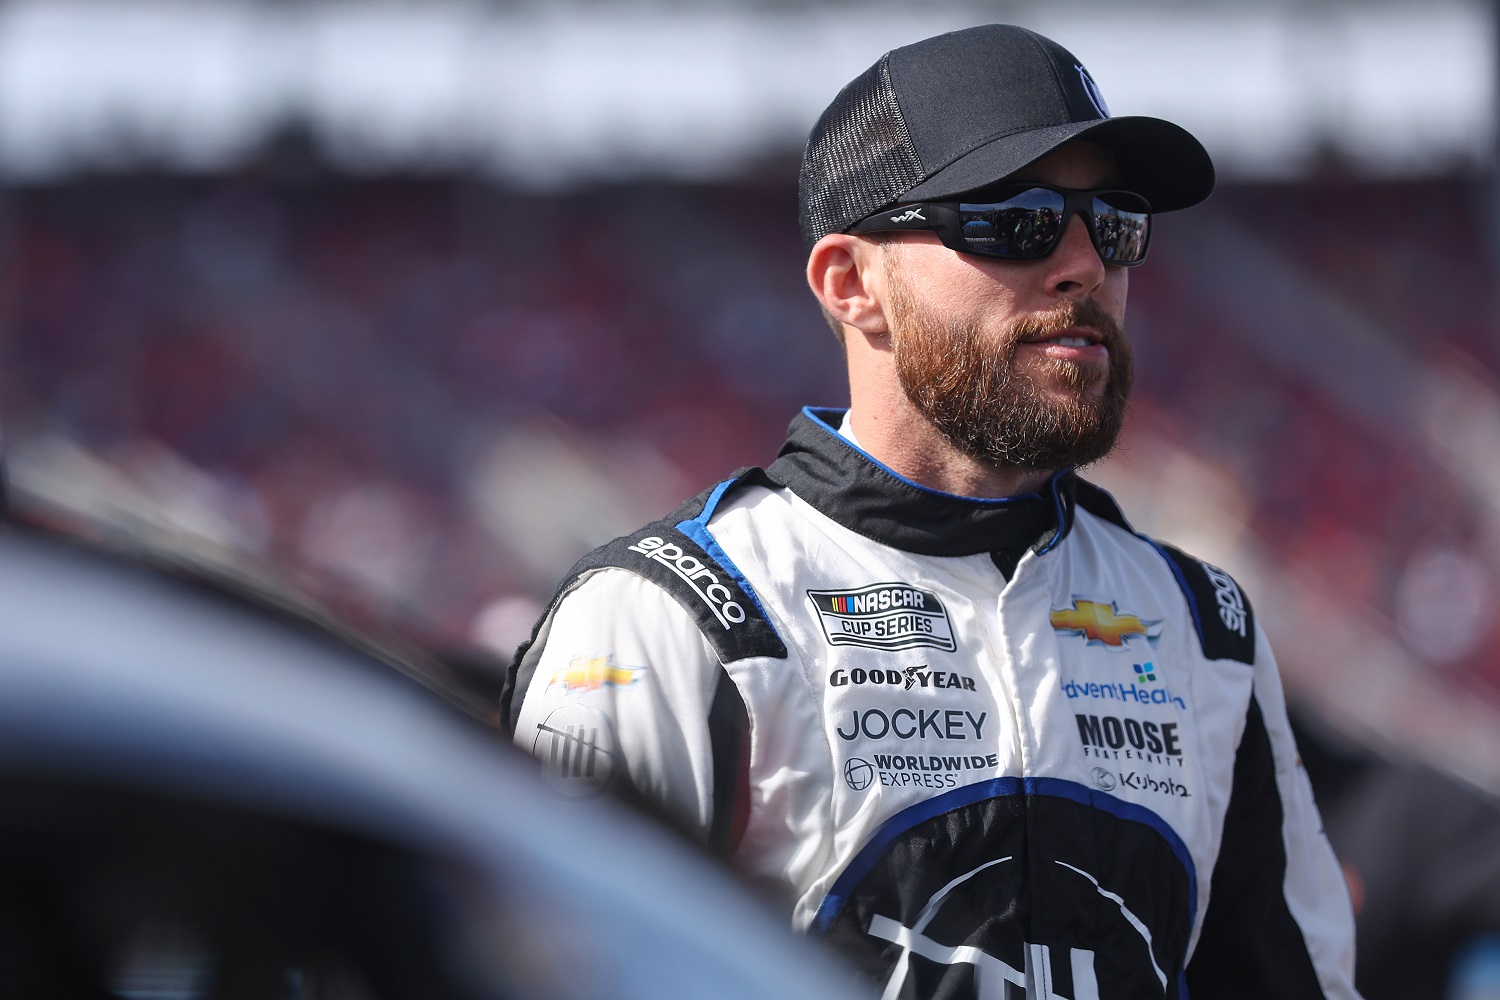 Ross Chastain Can Learn From a Crucial Change Ernie Irvan Made in His Cup Series Career